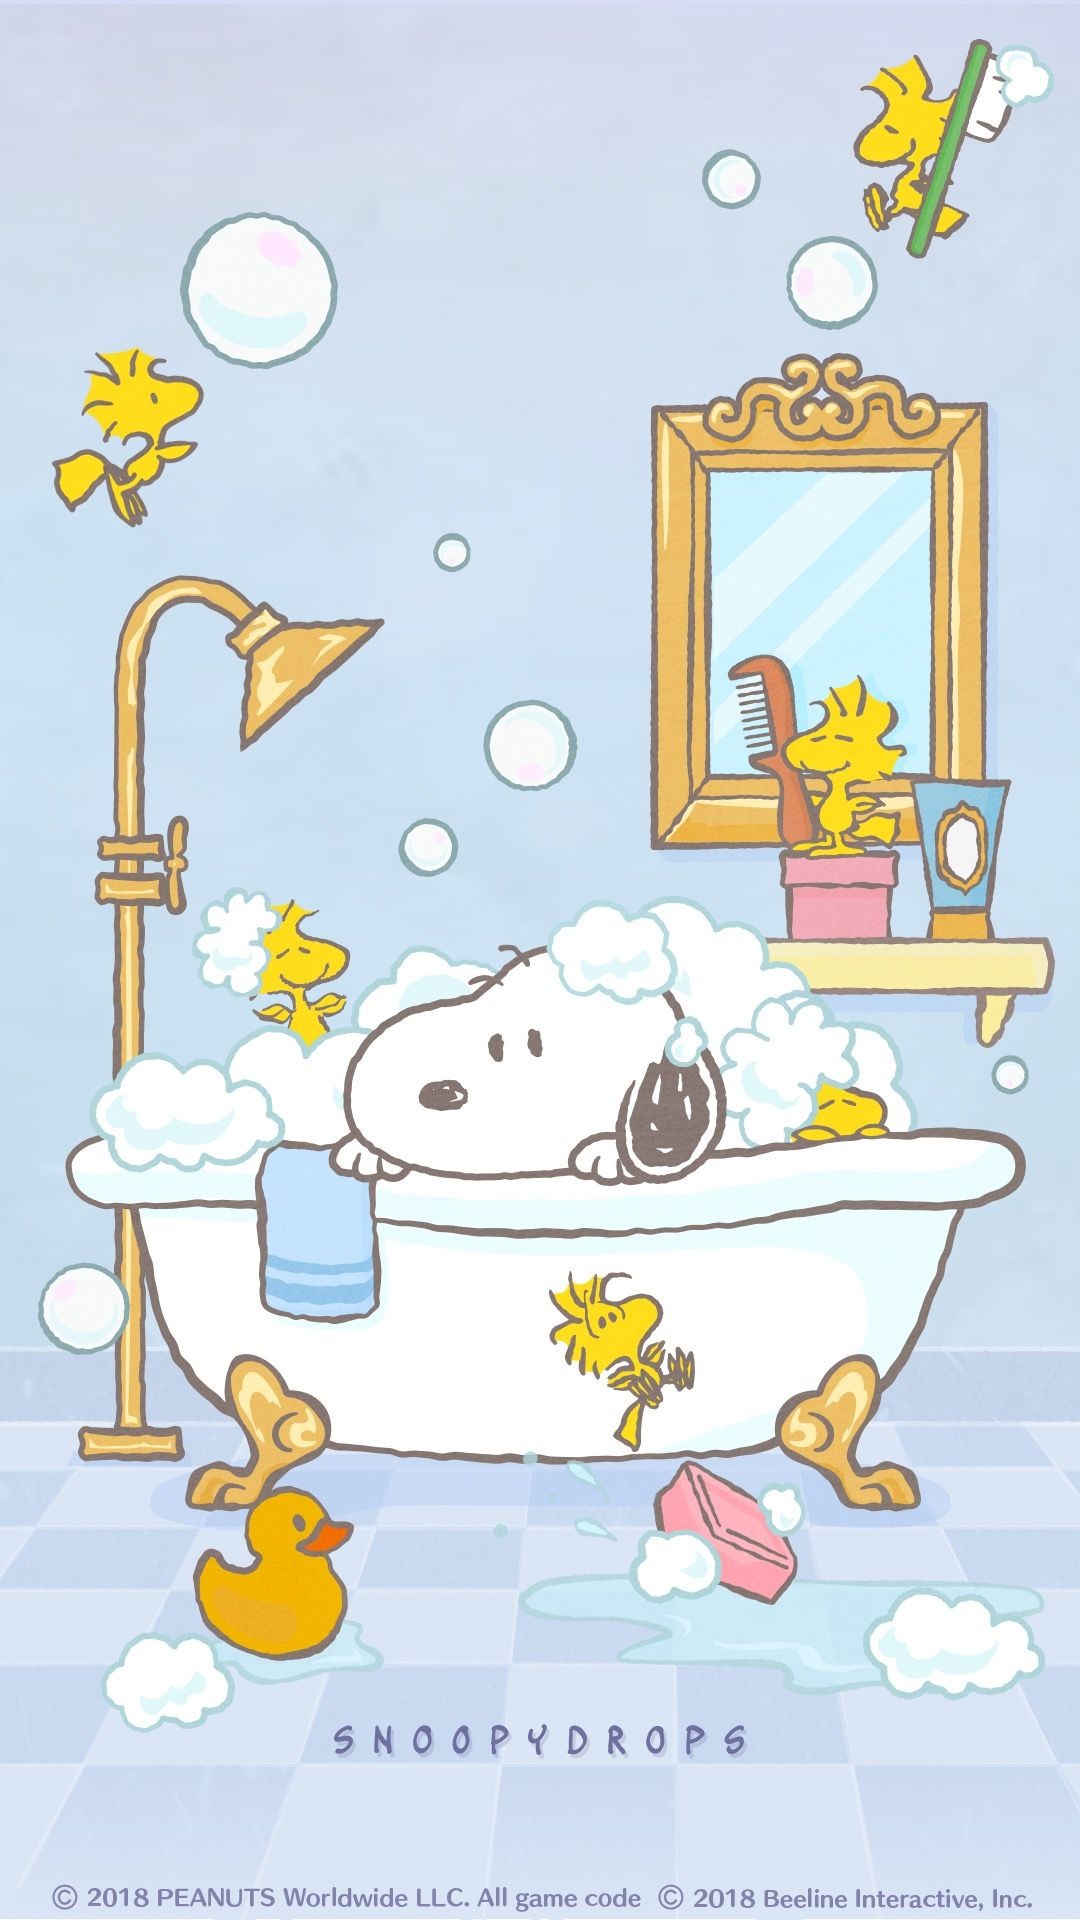 1080x1920 Bath time for Snoopy. #snoopy